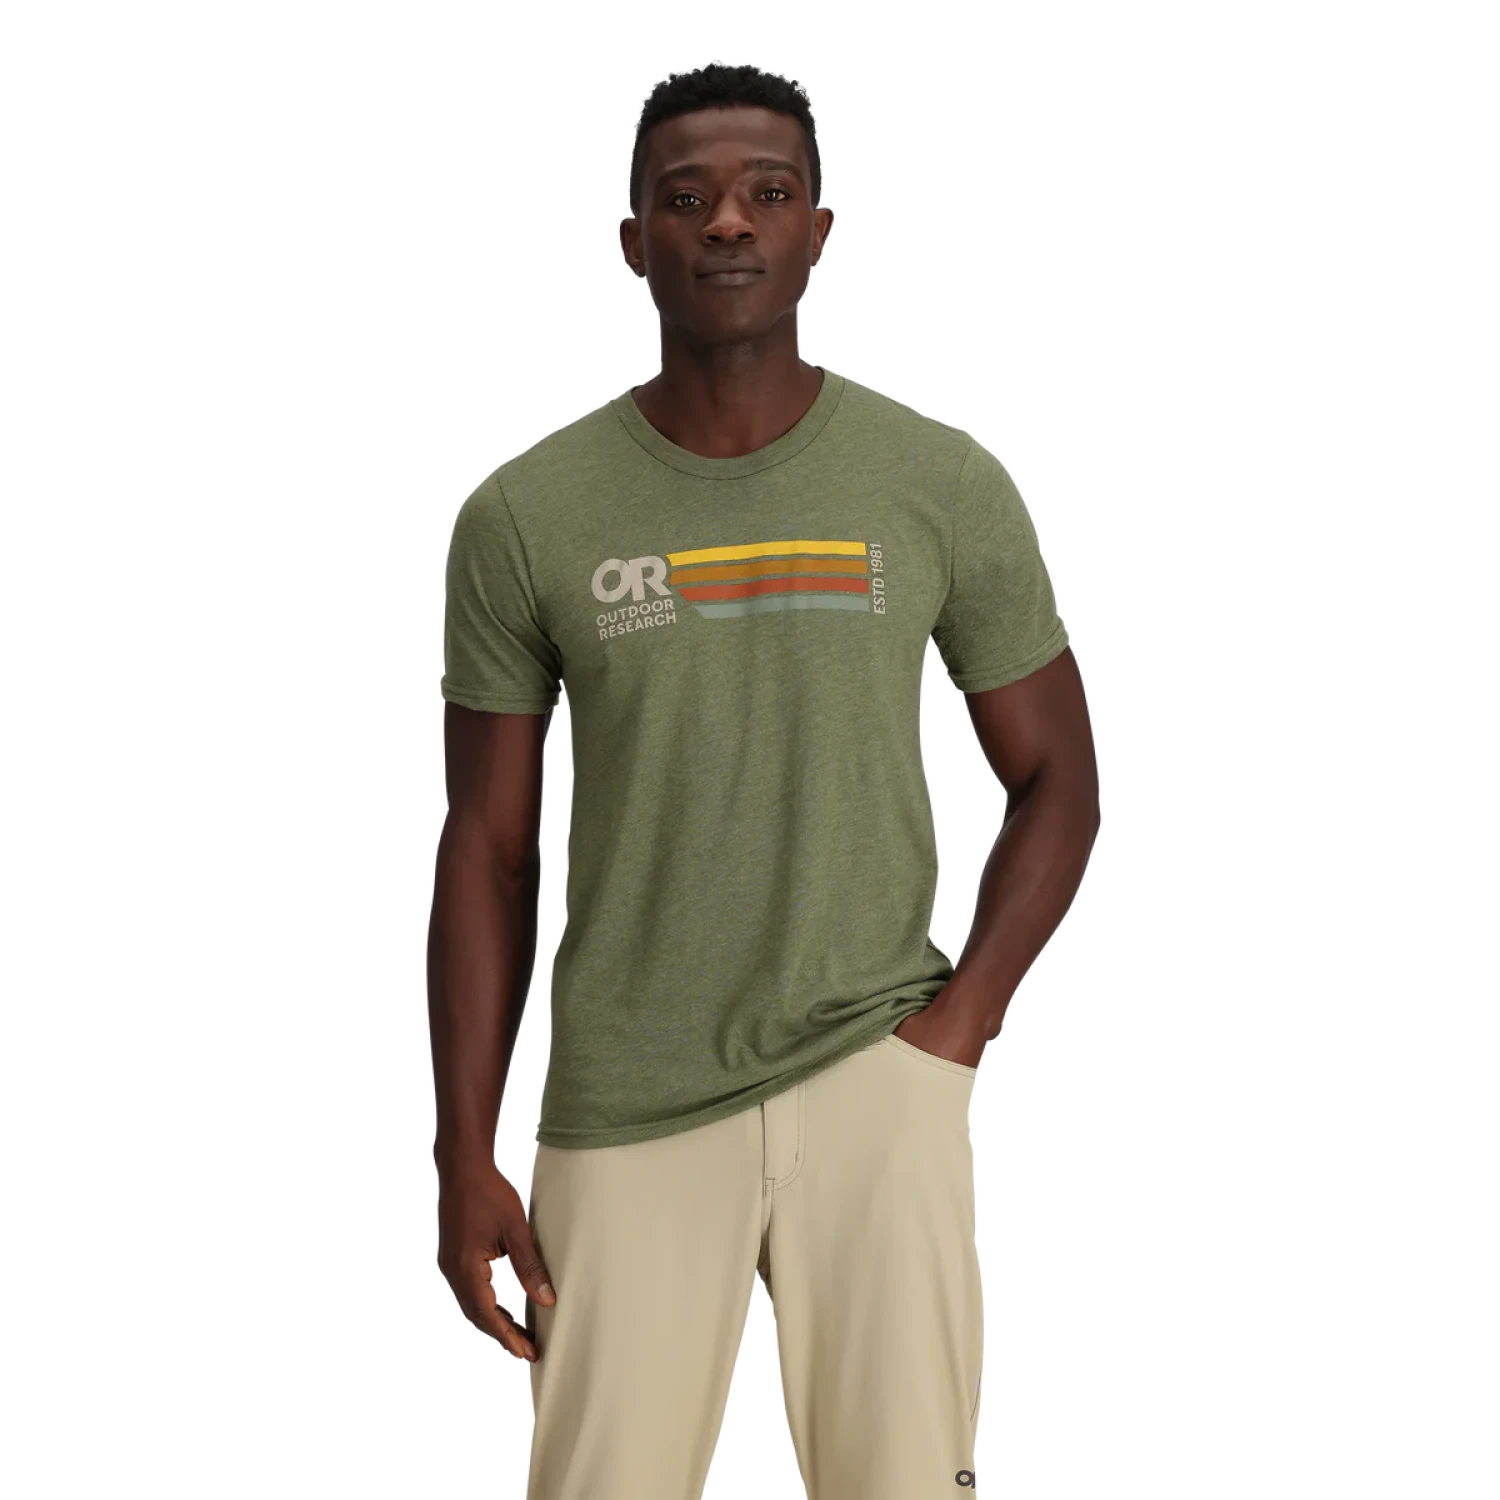 Outdoor Research Quadrise Senior Logo T-Shirt shown in the Grove color option. Front view on model.